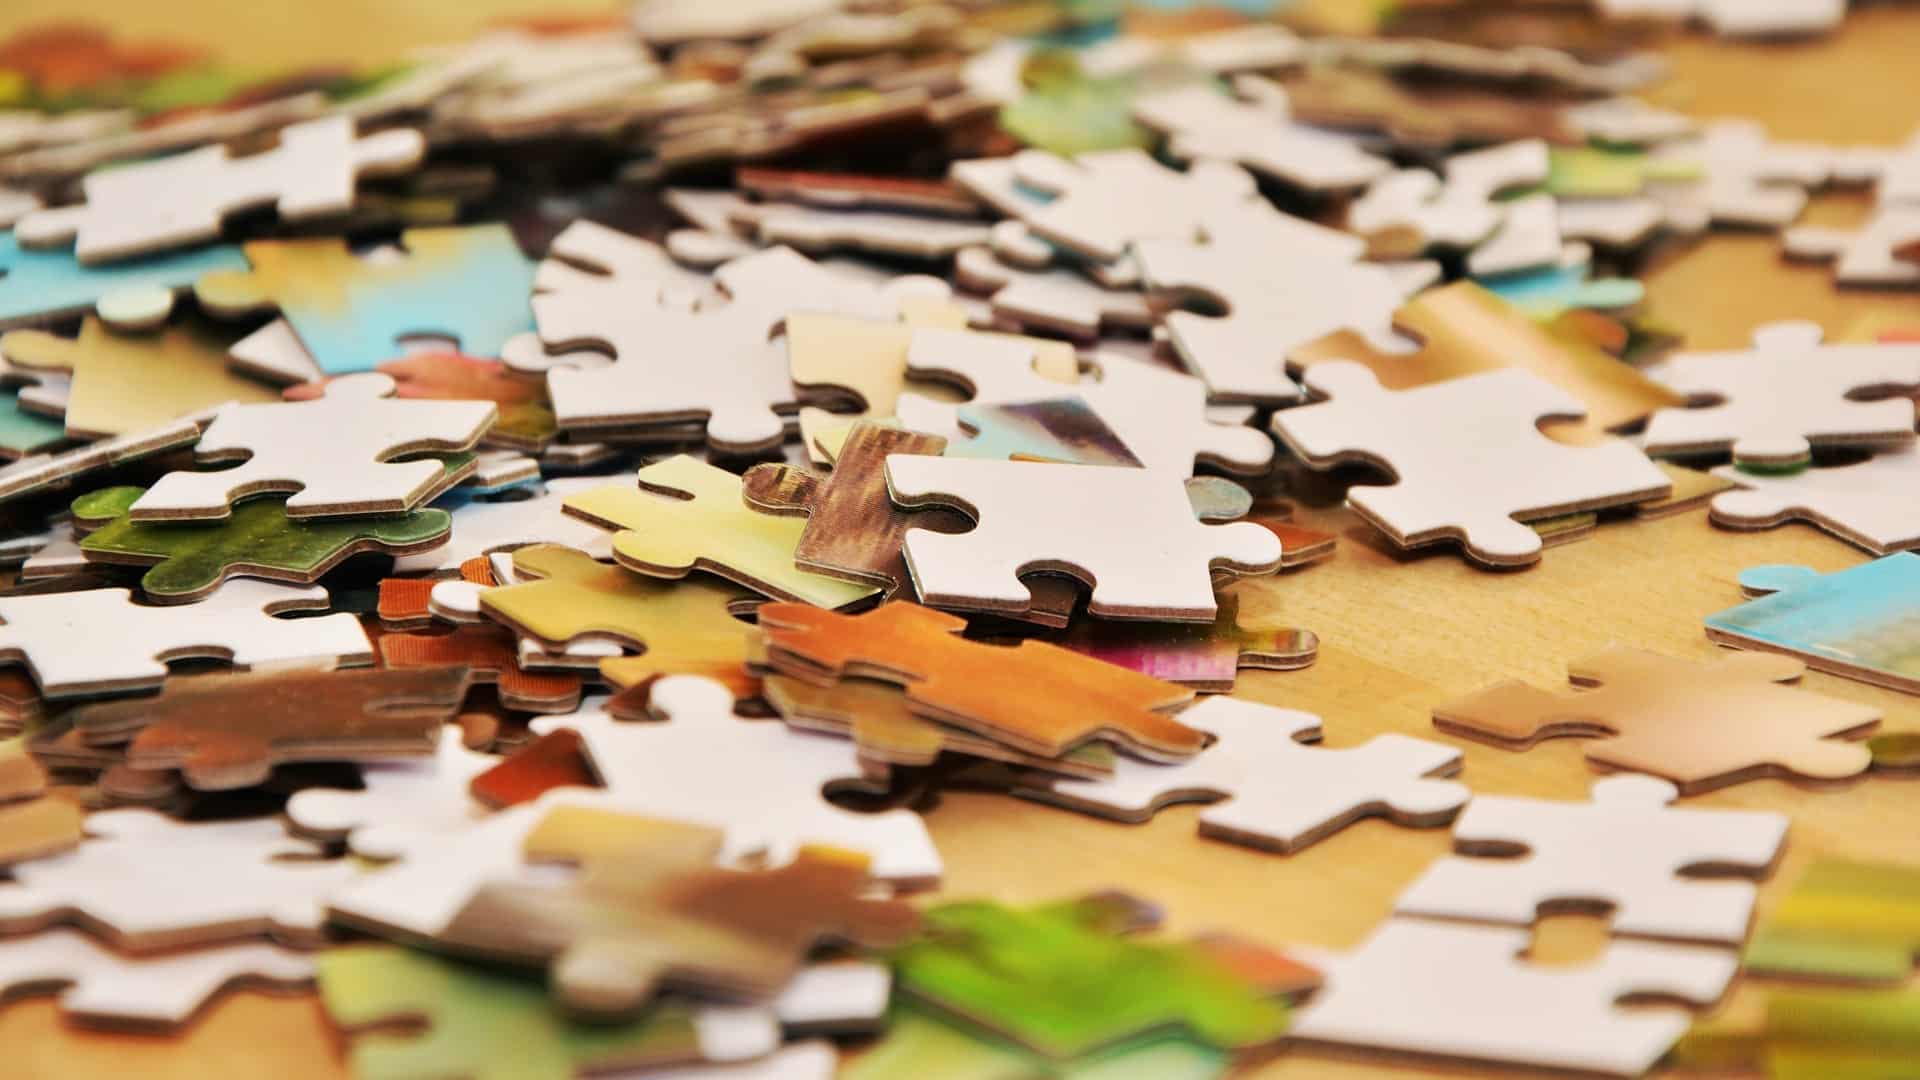 Life is a puzzling challenge